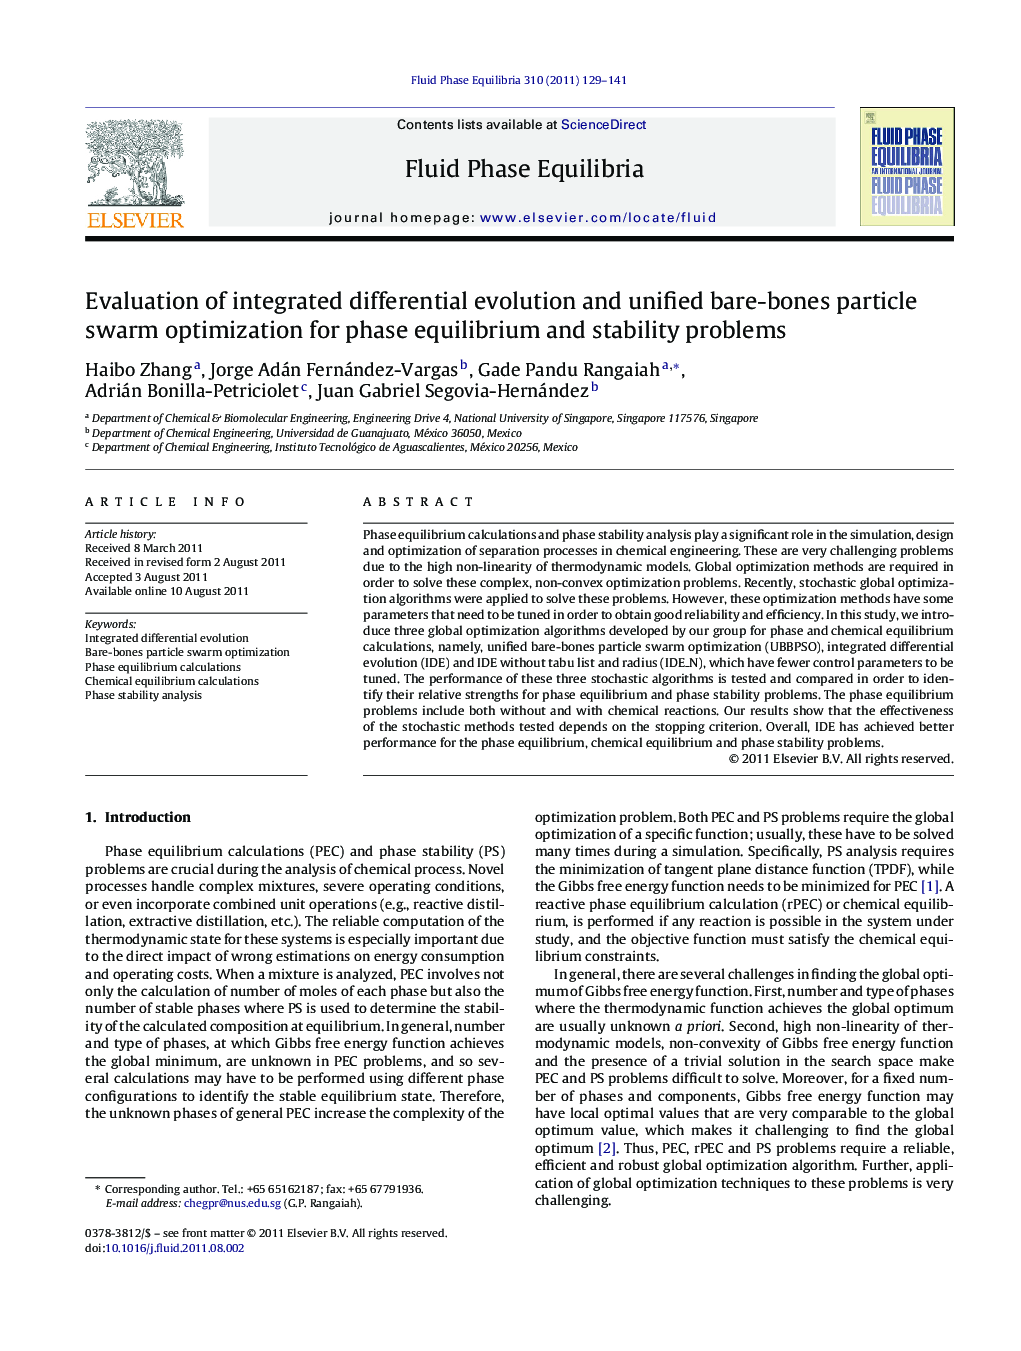 Evaluation of integrated differential evolution and unified bare-bones particle swarm optimization for phase equilibrium and stability problems